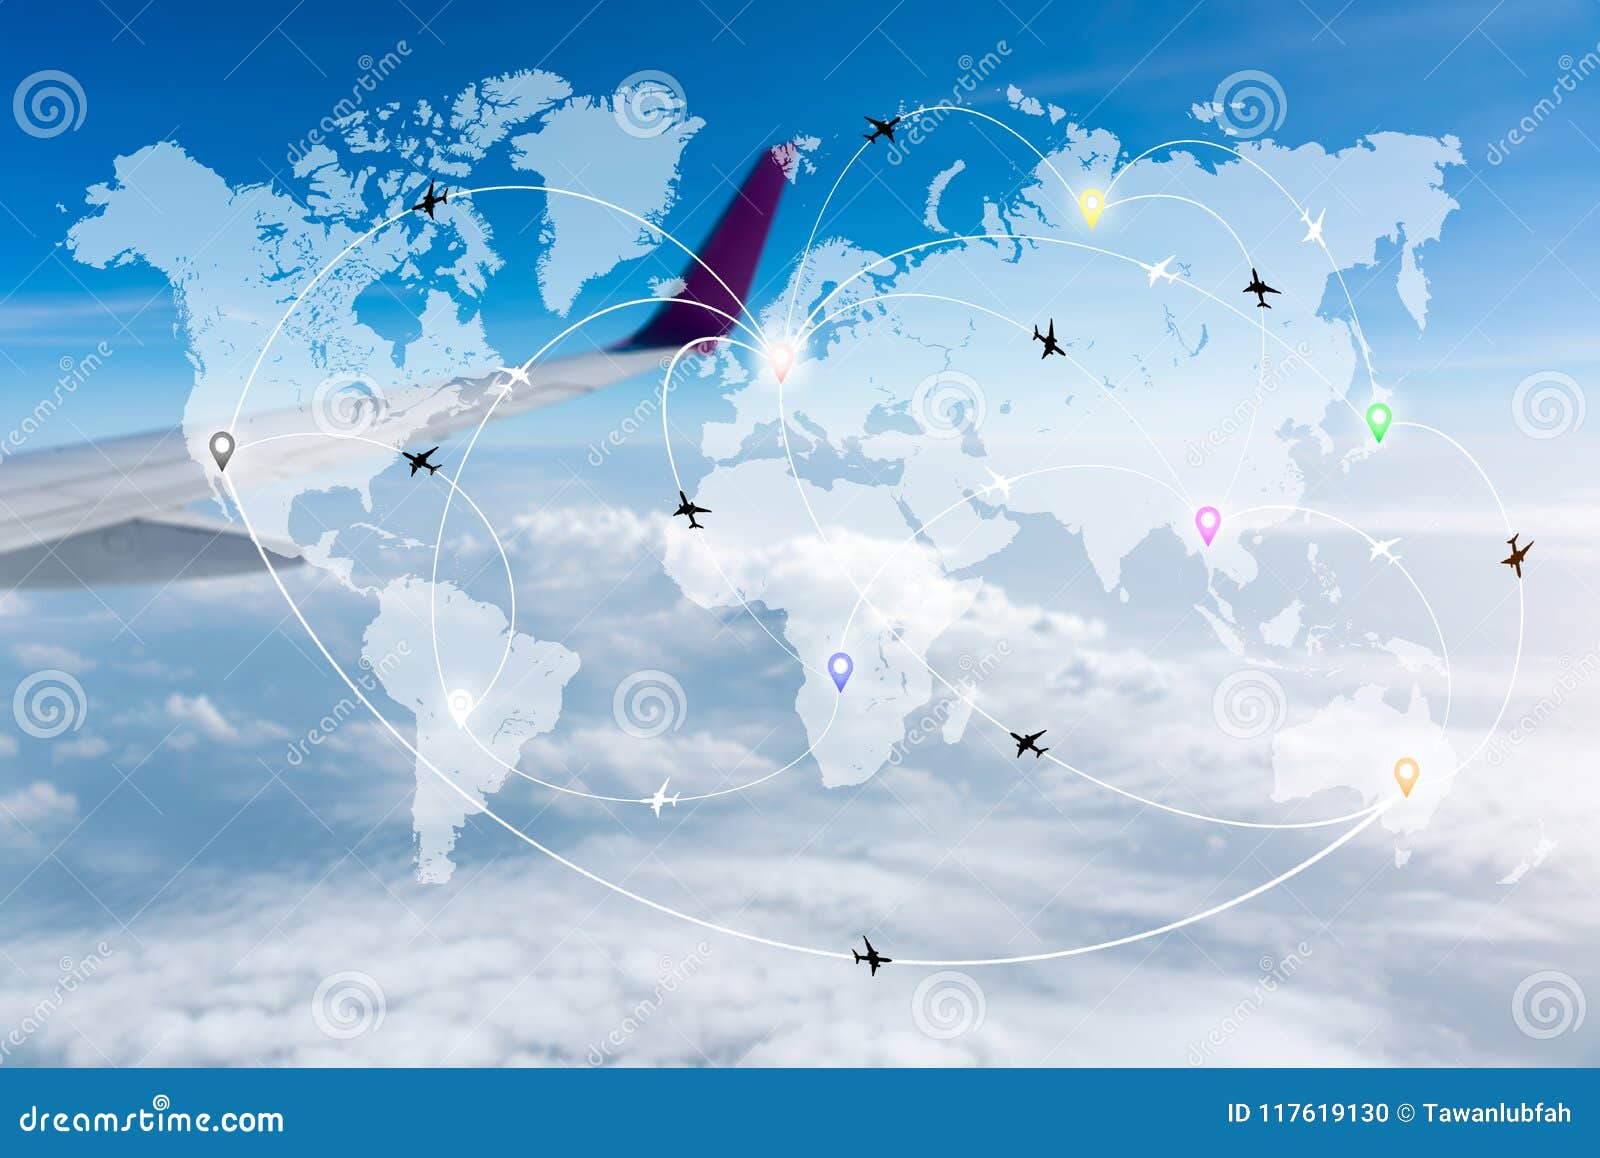 map of flight routes airplanes network with blurred wing in the